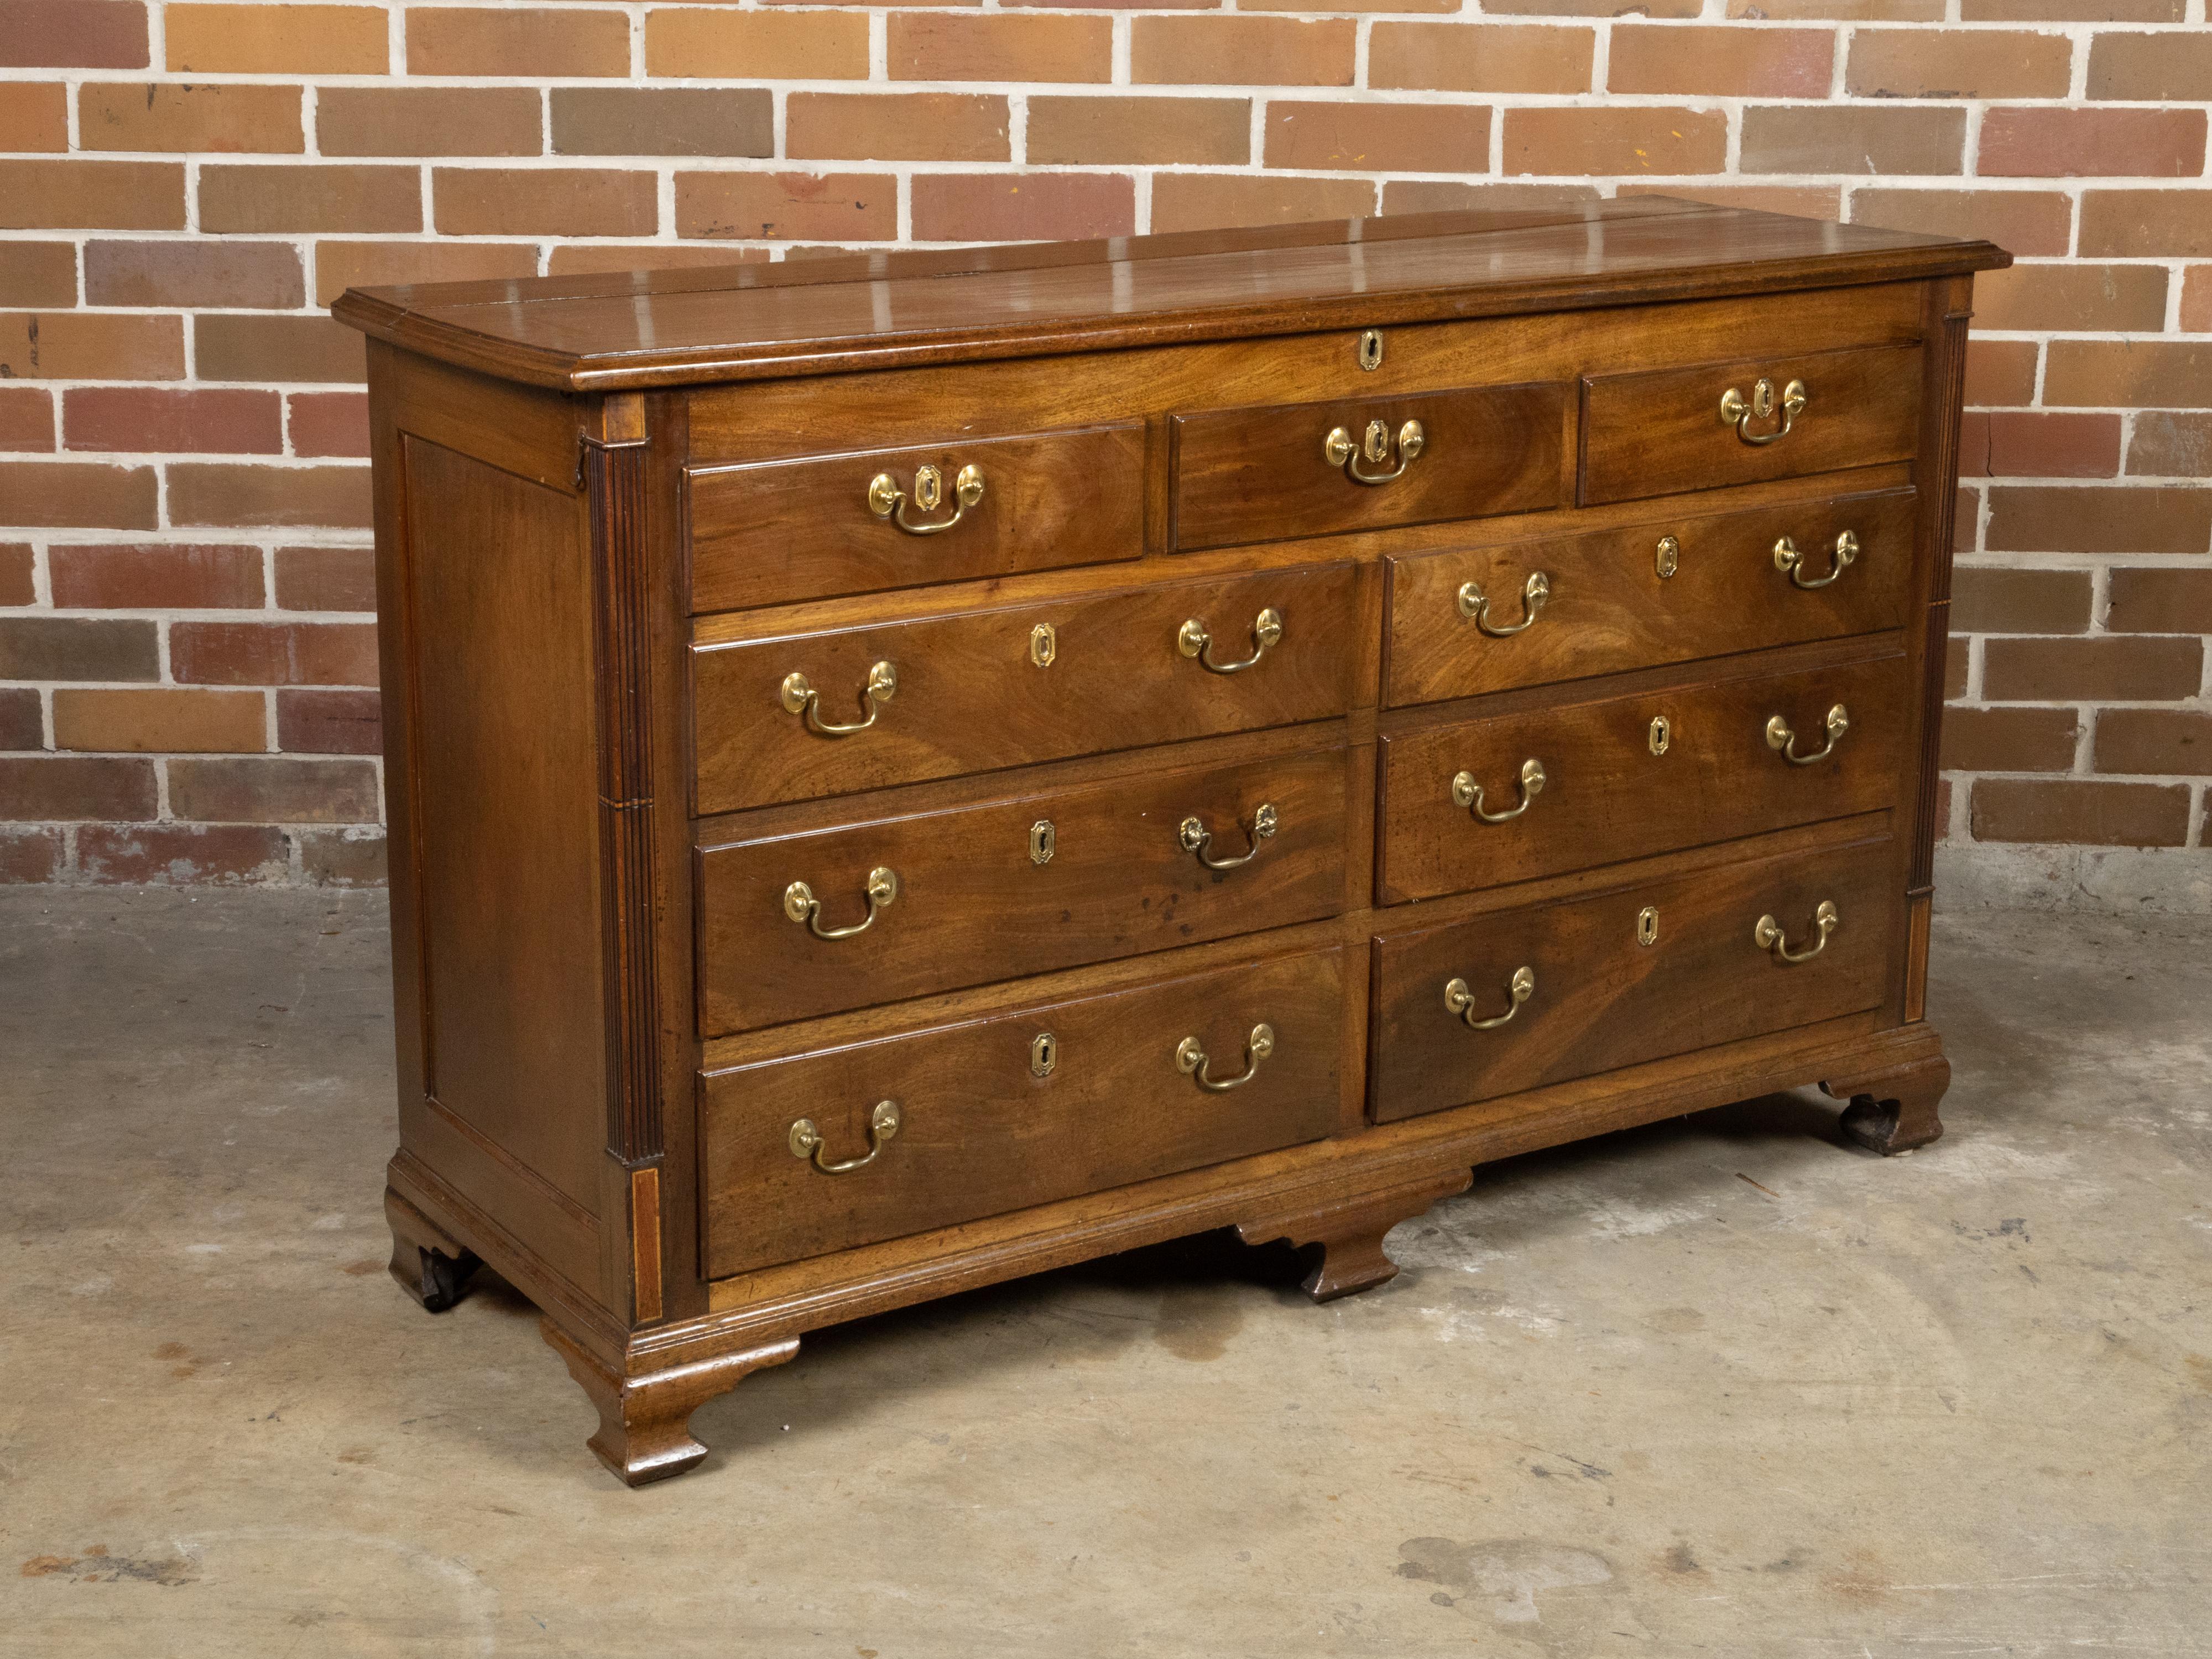 English Walnut 19th Century Flip Top Sideboard with Drawers and Brass Hardware For Sale 1